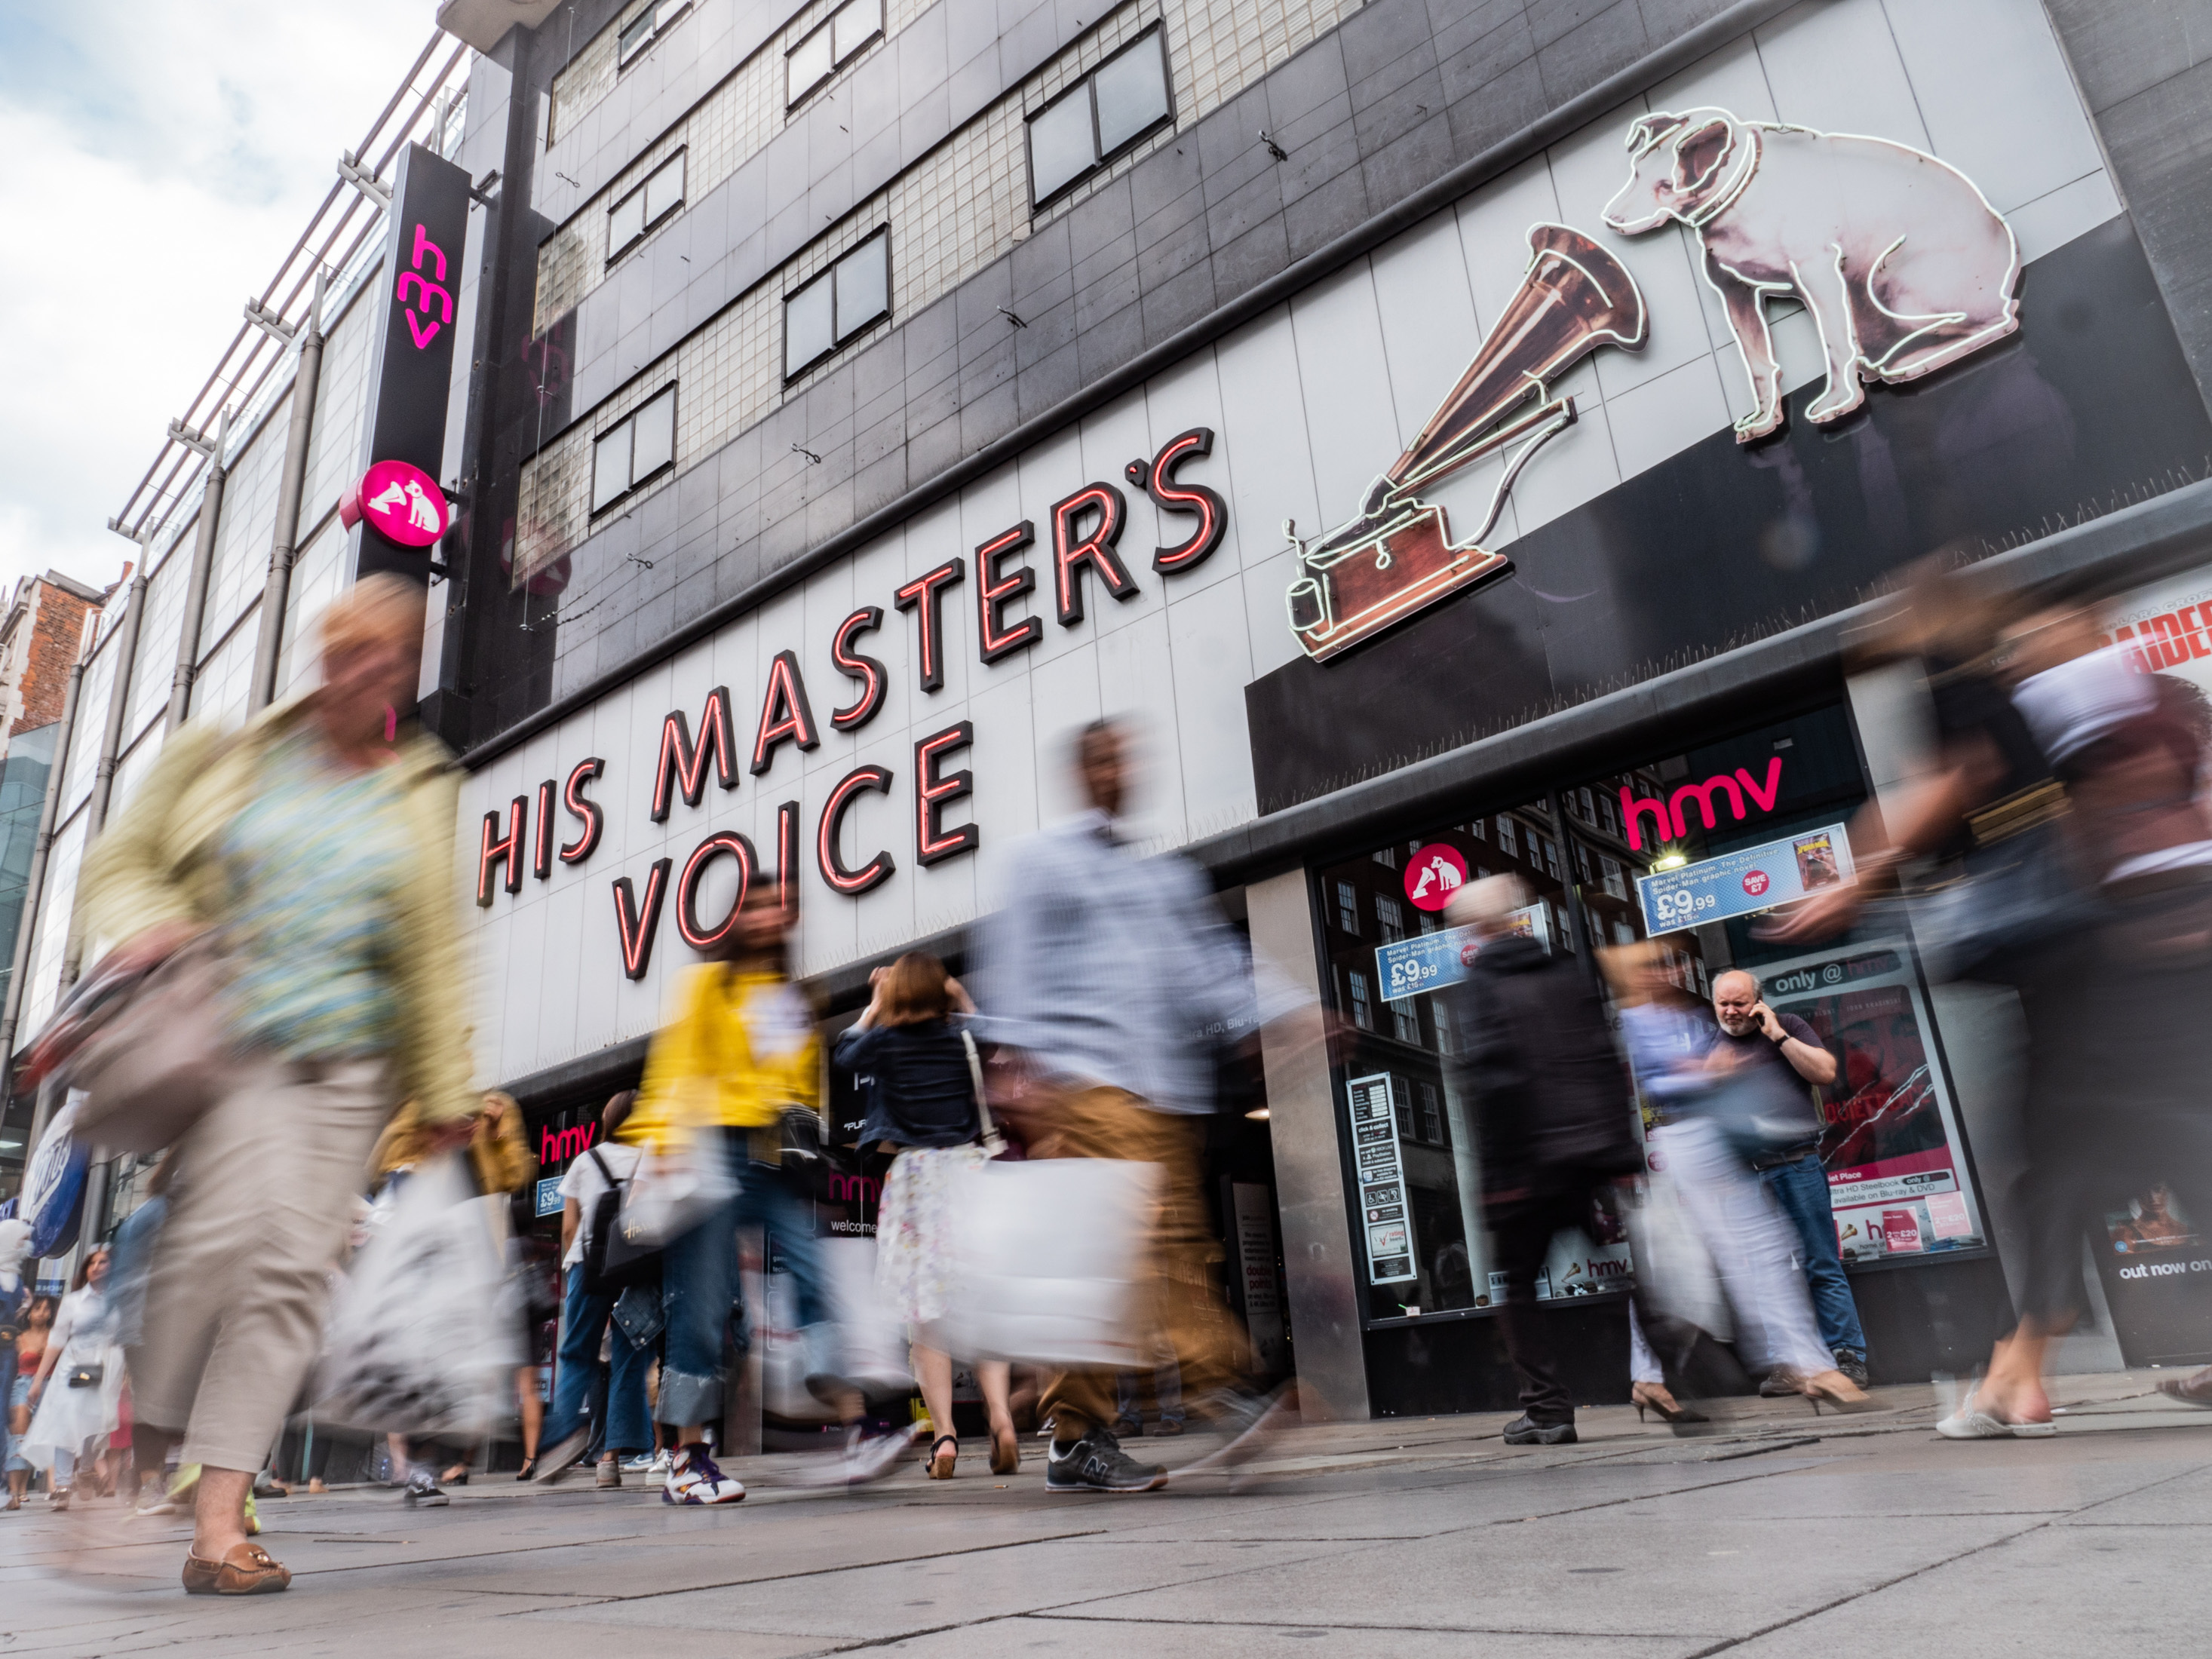 Return of the king: HMV is coming back to its Oxford Street home